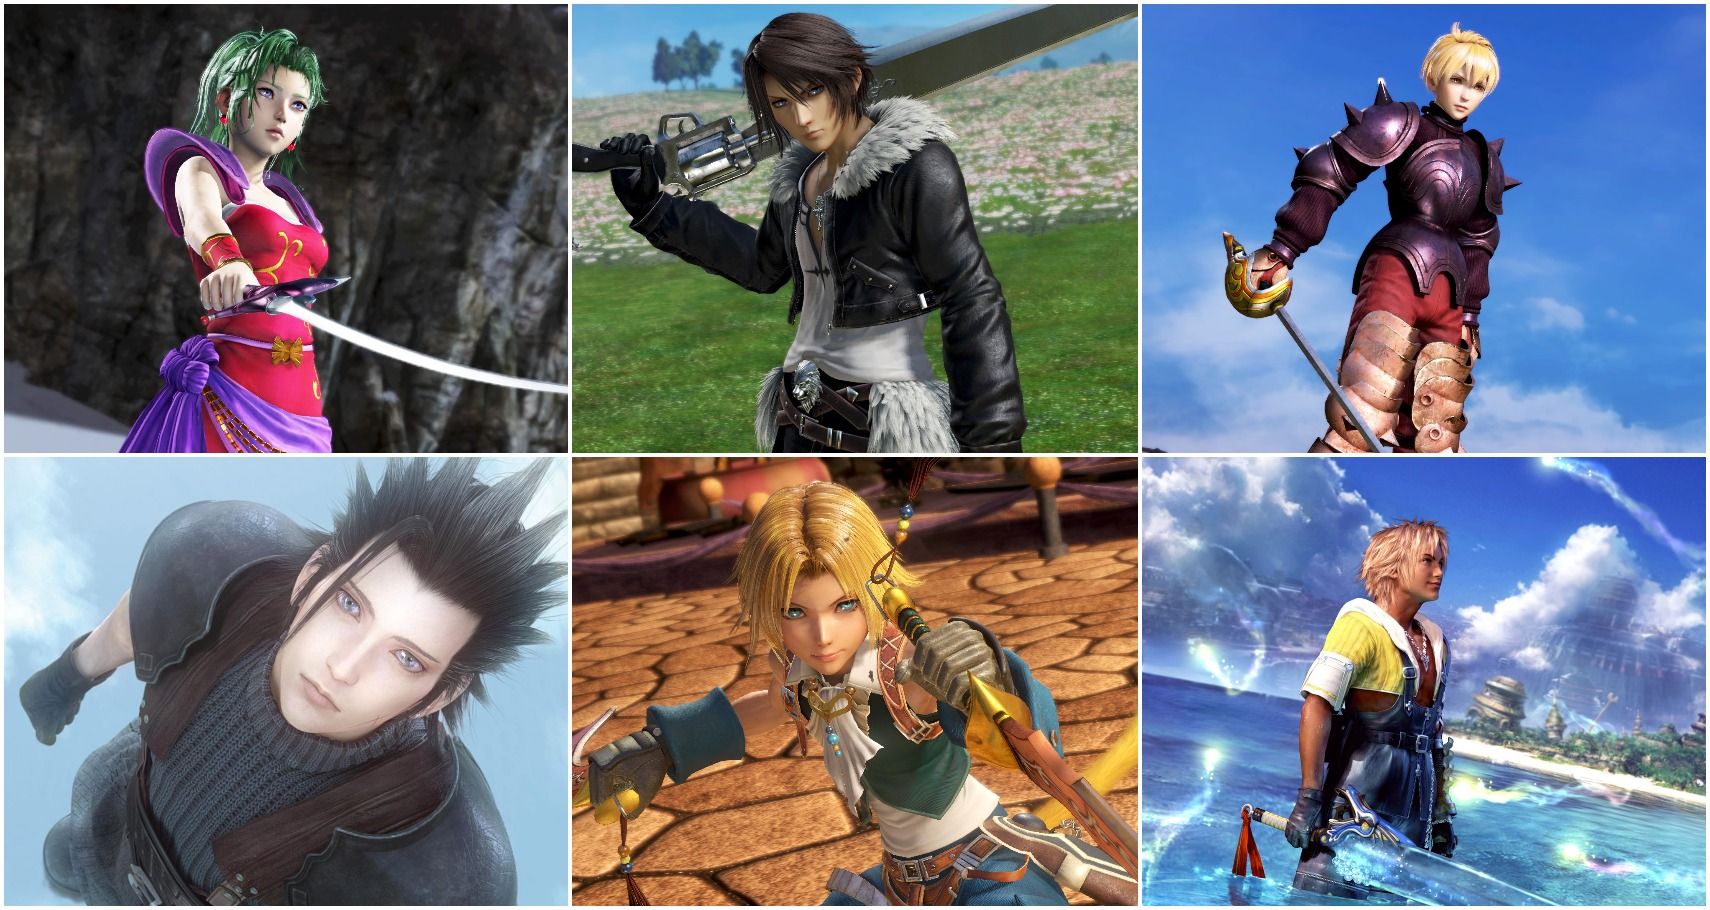 Final Fantasy: Every Story Ranked Worst to Best